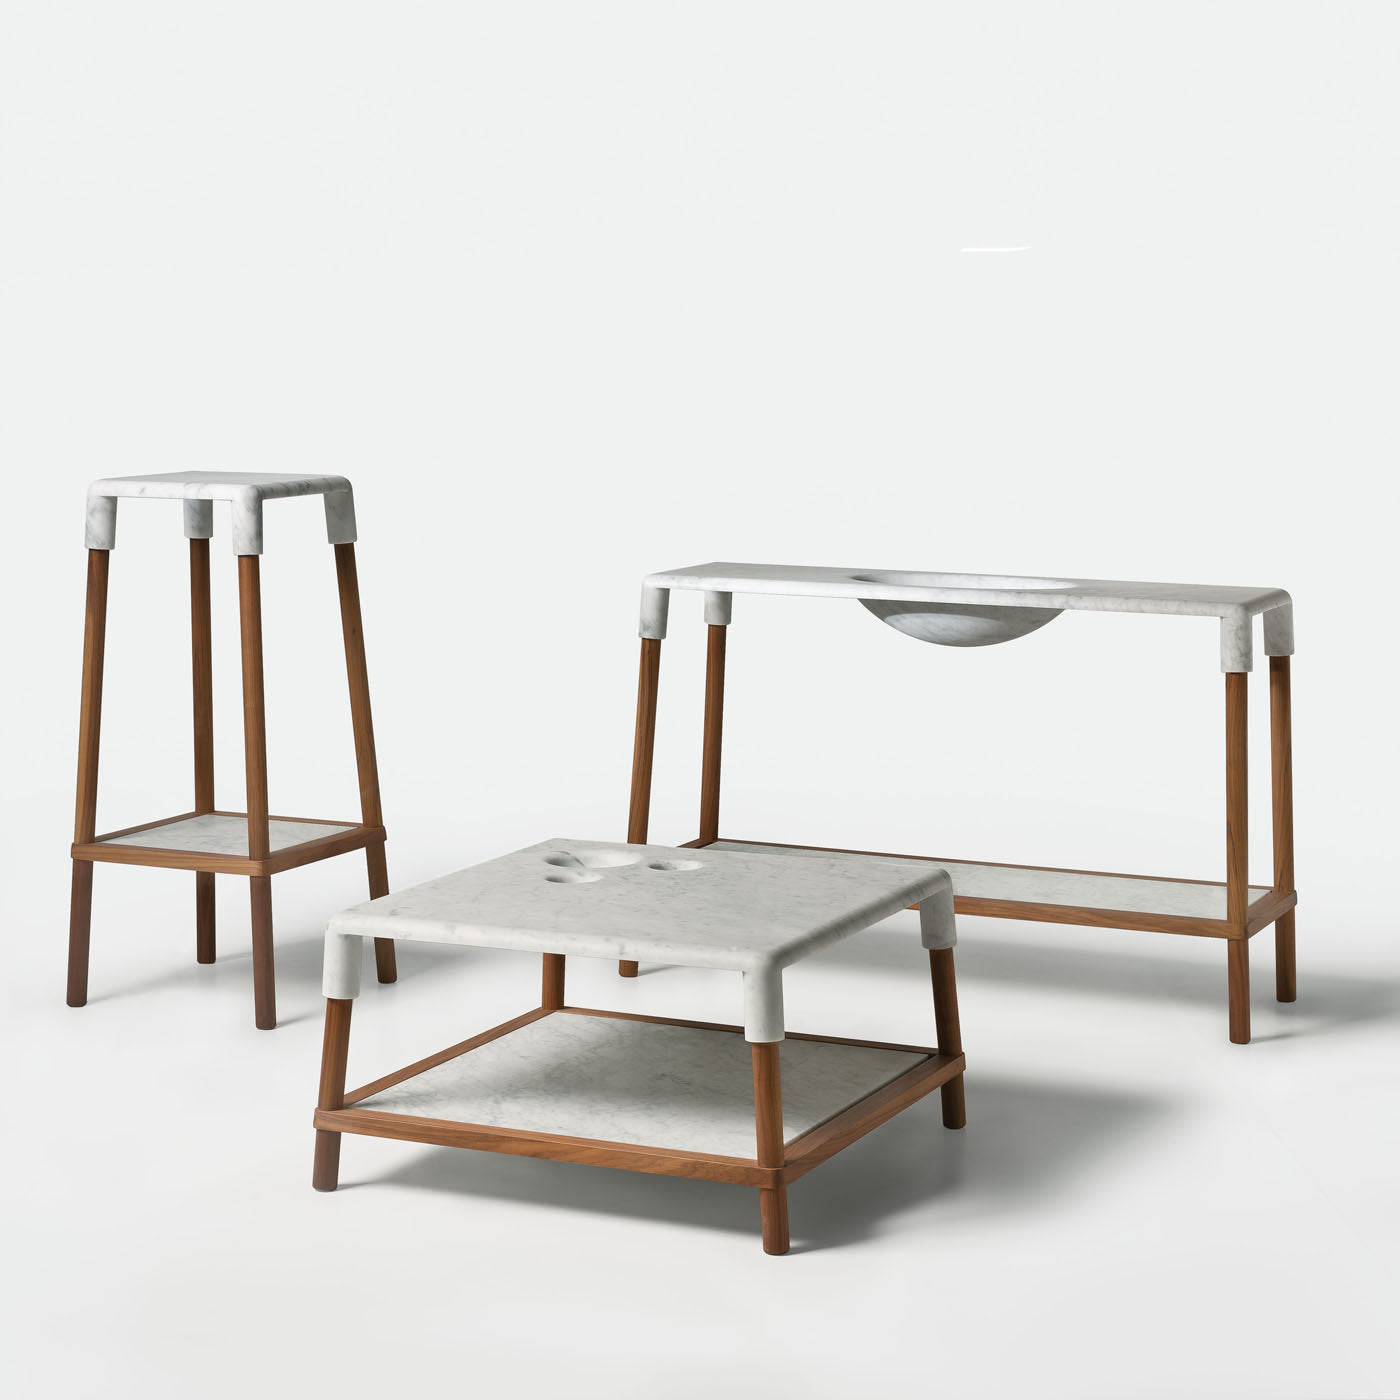 Oslo High Table by Gritti Rollo - Alternative view 1